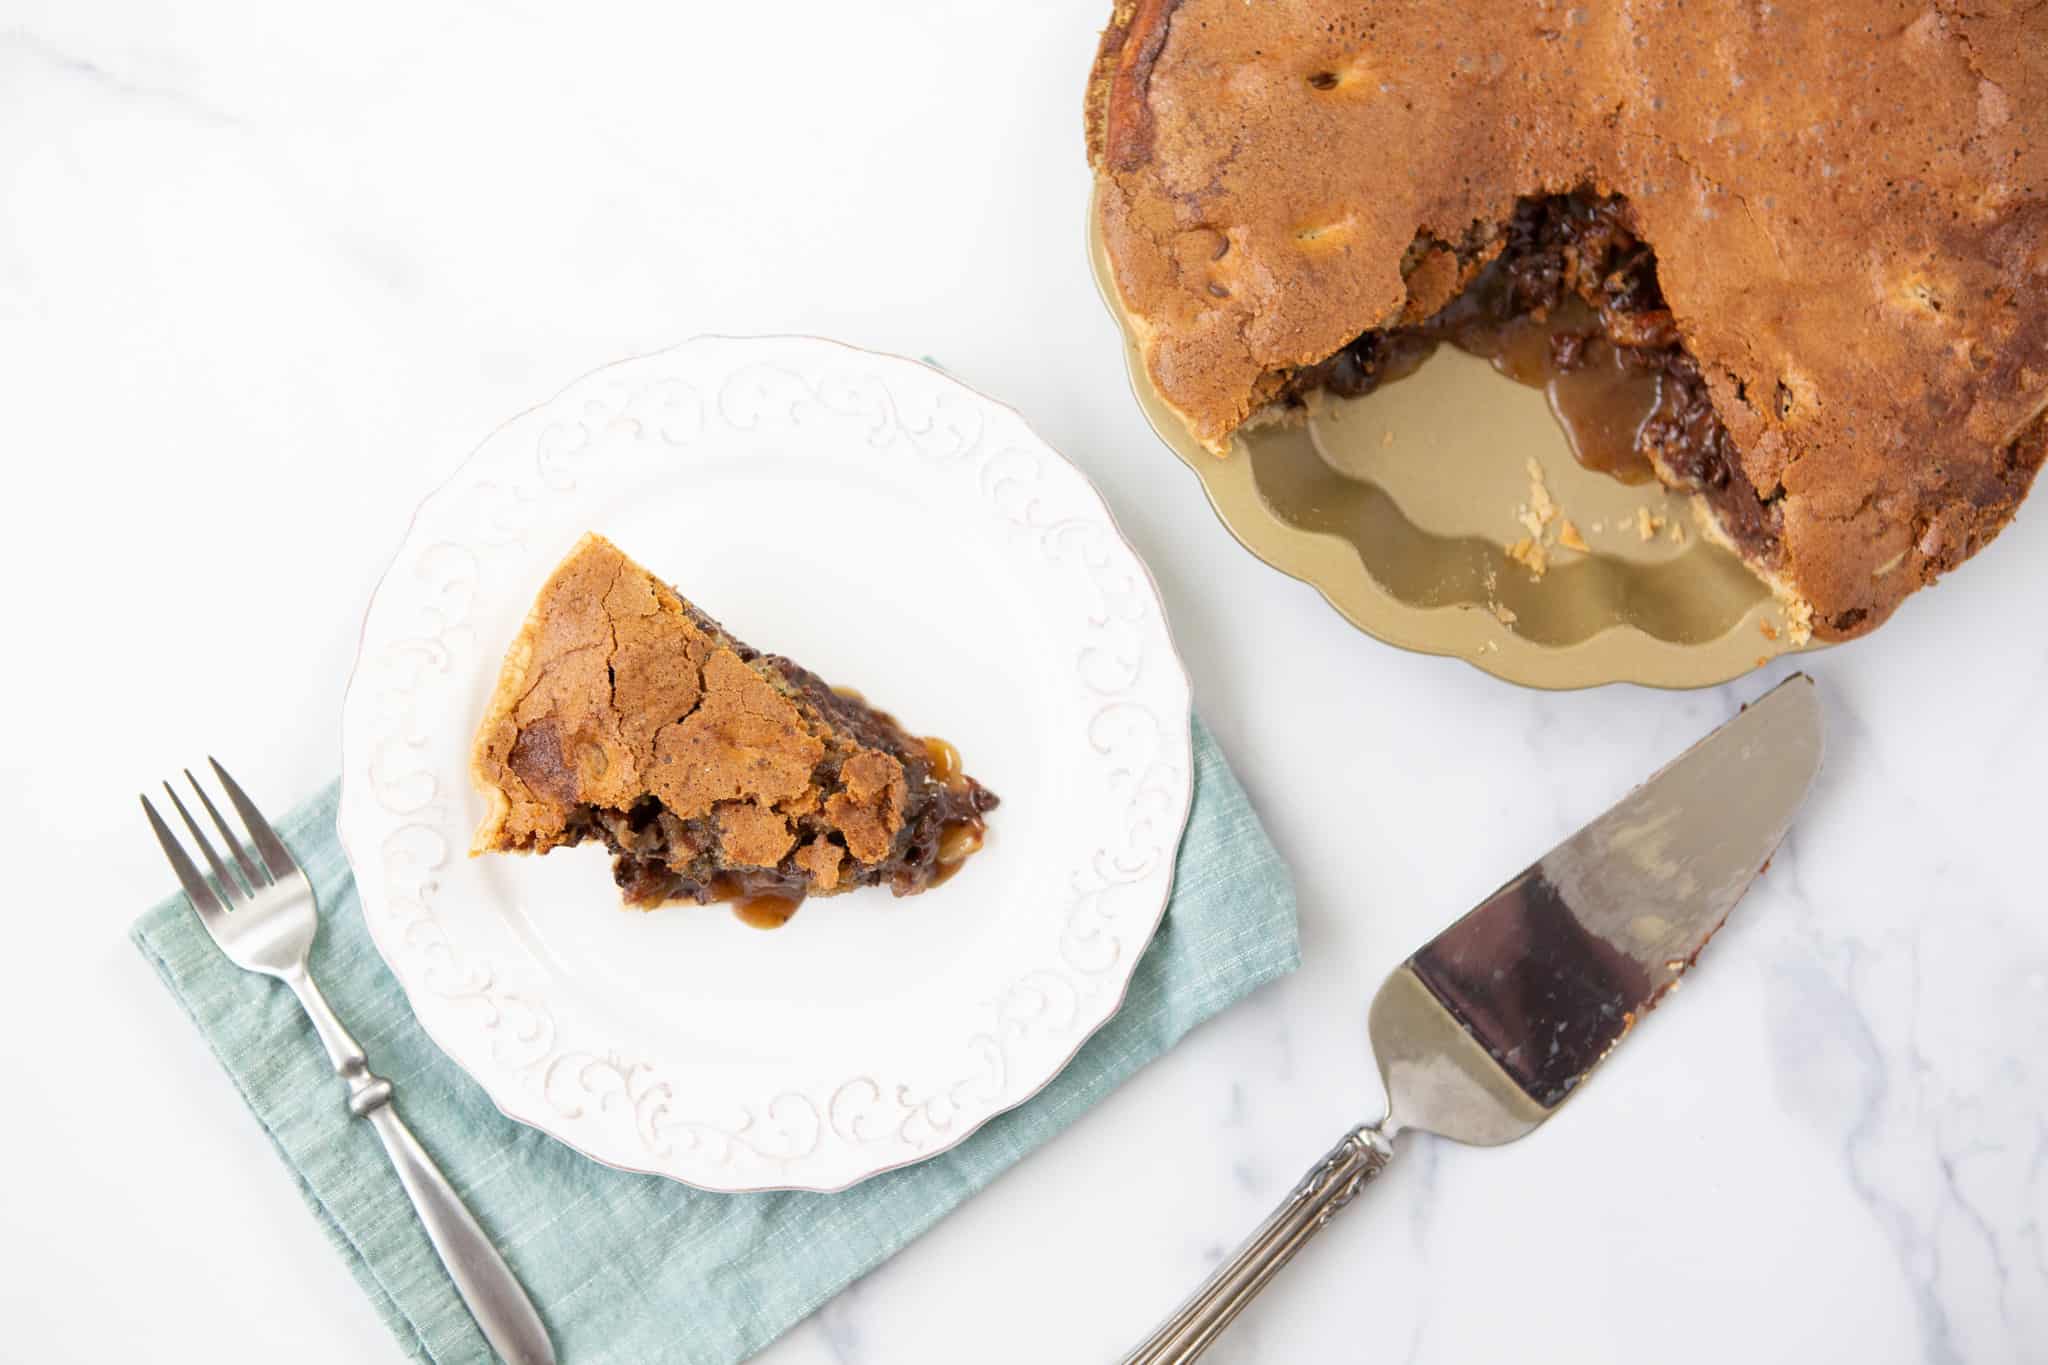 slice of chocolate chip pecan pie on a plate next to the whole pie